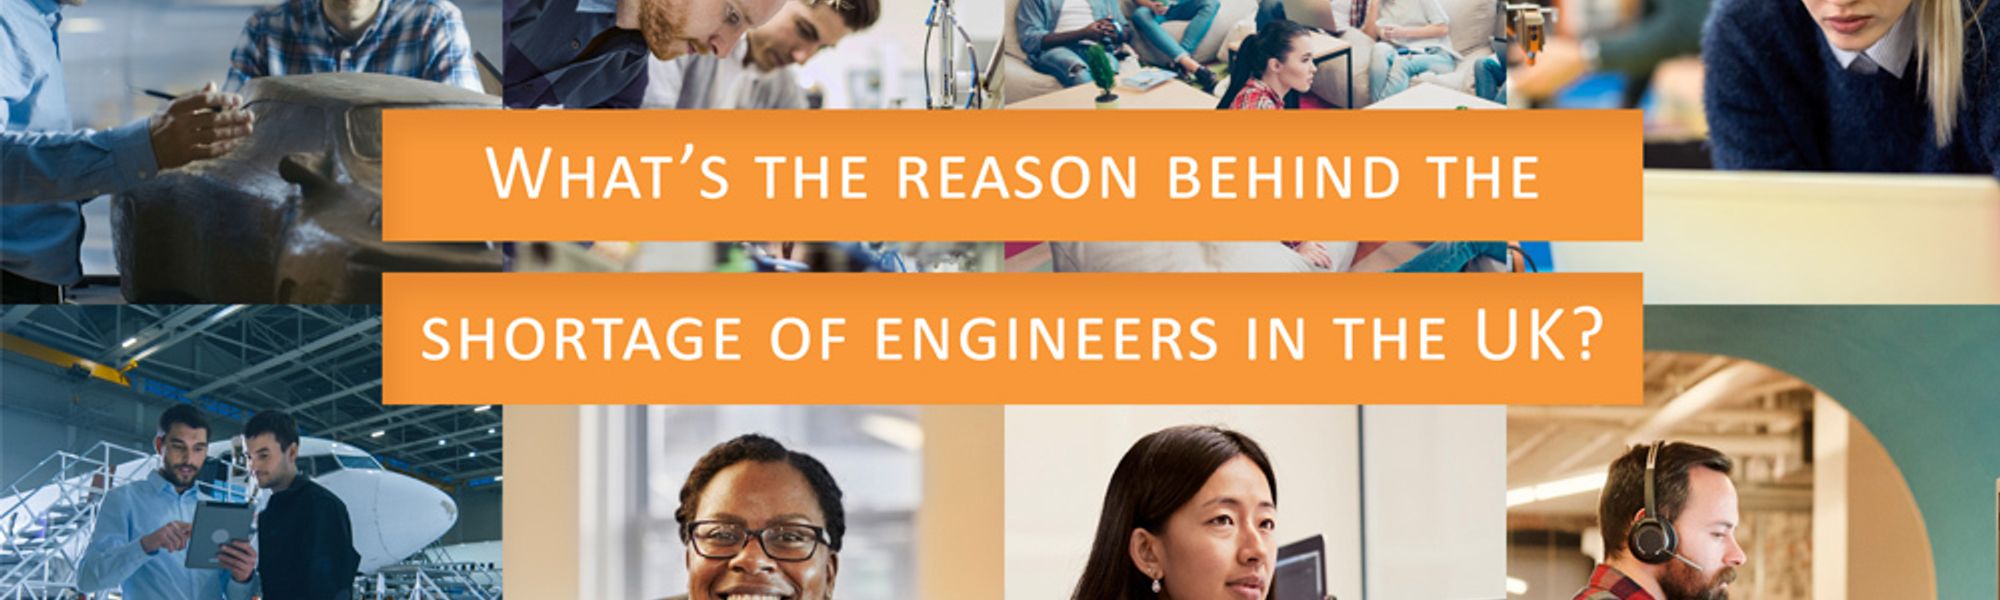 What Is The Reason Behind The Shortage Of Engineers In The Uk